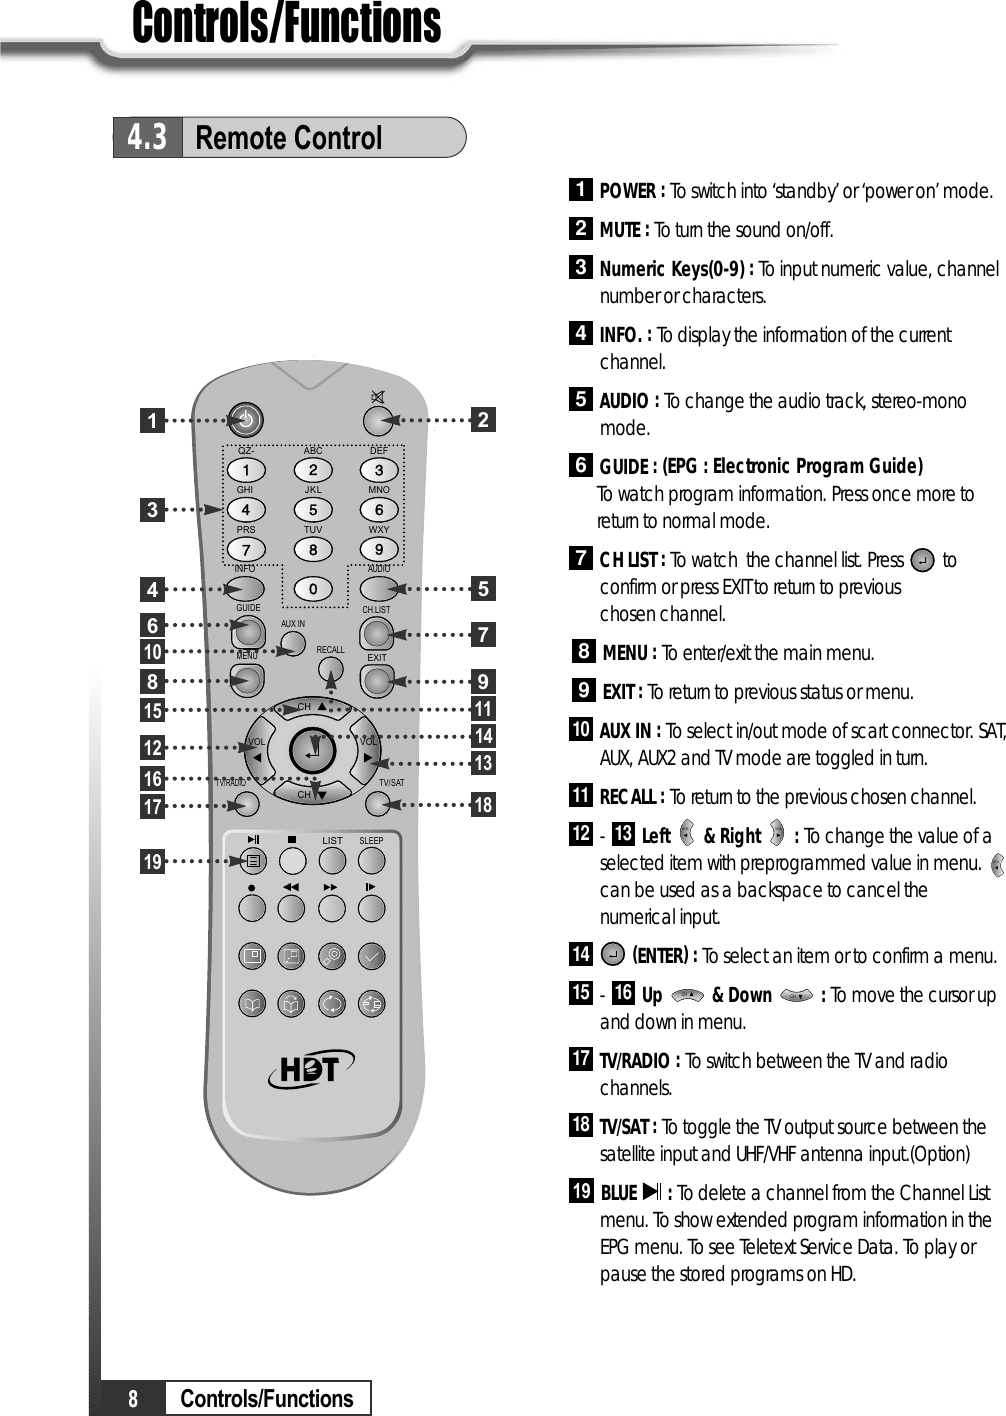 8Controls/FunctionsControls/FunctionsPOWER :To switch into ‘standby’ or ‘power on’ mode.MUTE : To turn the sound on/off.Numeric Keys(0-9) : To input numeric value, channelnumber or characters.INFO. :To display the information of the currentchannel.AUDIO :To change the audio track, stereo-monomode.GUIDE : (EPG : Electronic Program Guide)To watch program information. Press once more toreturn to normal mode.CH LIST :To watch  the channel list. Press  toconfirm or press EXIT to return to previouschosen channel.MENU : To enter/exit the main menu.EXIT :To return to previous status or menu.AUX IN : To select in/out mode of scart connector. SAT,AUX, AUX2 and TV mode are toggled in turn. RECALL :To return to the previous chosen channel.-  Left &amp; Right : To change the value of aselected item with preprogrammed value in menu. can be used as a backspace to cancel thenumerical input.(ENTER):To select an item or to confirm a menu.-  Up &amp; Down : To move the cursor upand down in menu. TV/RADIO :To switch between the TV and radiochannels.TV/SAT :To toggle the TV output source between thesatellite input and UHF/VHF antenna input.(Option)BLUE : To delete a channel from the Channel Listmenu. To show extended program information in theEPG menu. To see Teletext Service Data. To play orpause the stored programs on HD.191817CHCH161514VOLVOLVOL13121110987654321QZ-ABC DEFGHI JKL MNOPRS TUV WXYINFOAUDIOGUIDECH.LISTAUX INRECALLTV/RADIOTV/SATMENUEXITCHVOLVOLCHSLEEPLIST13468101216172579111318144.3Remote Control1519